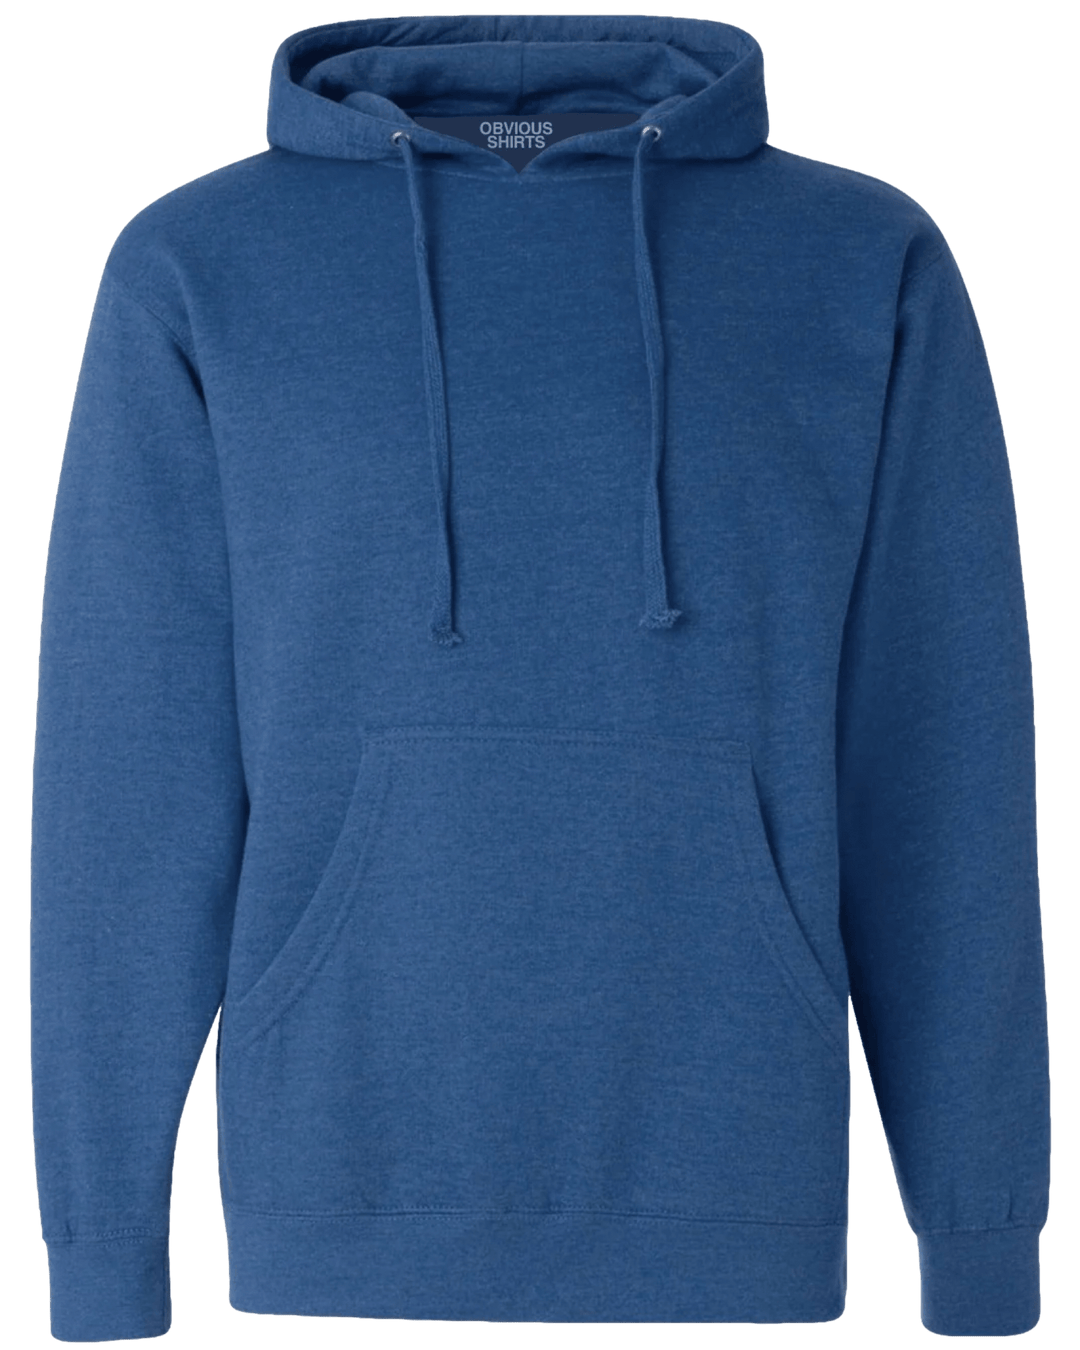 CREATE YOUR OWN OBVIOUS SHIRT. (HOODIE) - OBVIOUS SHIRTS